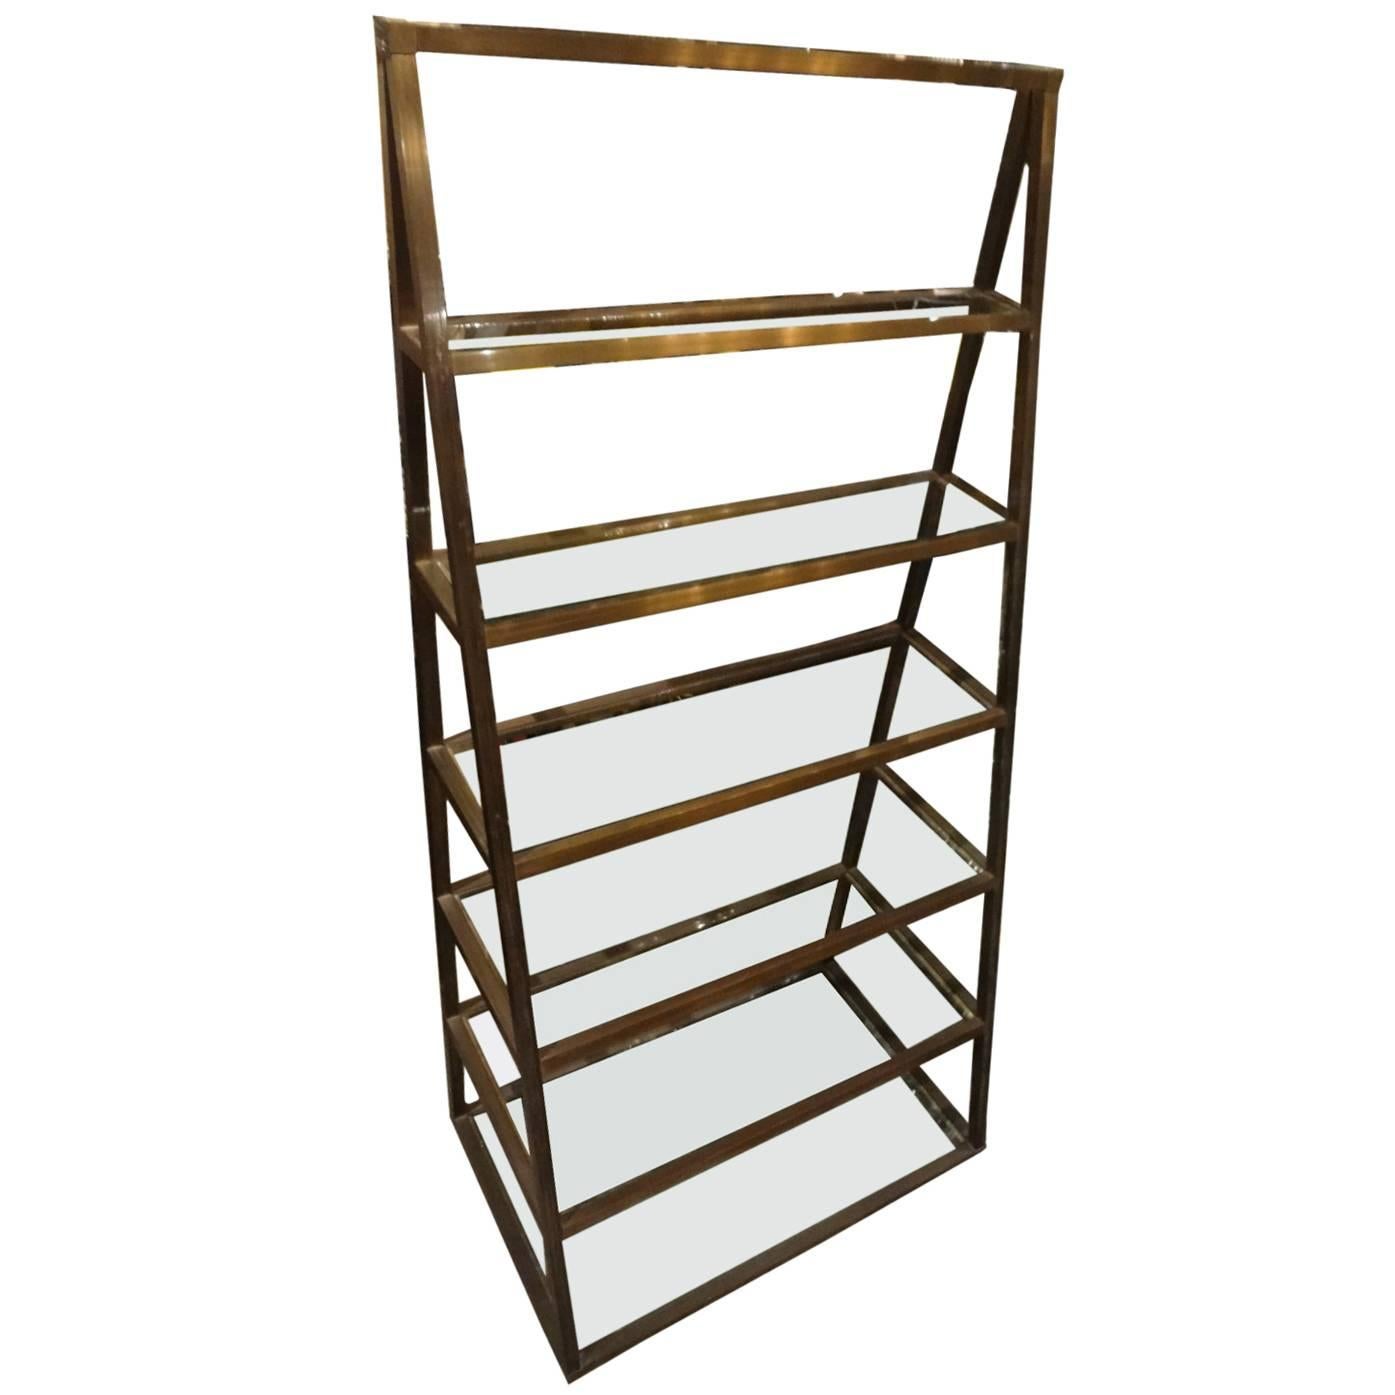 Early 20th Century Brass Shelving Unit